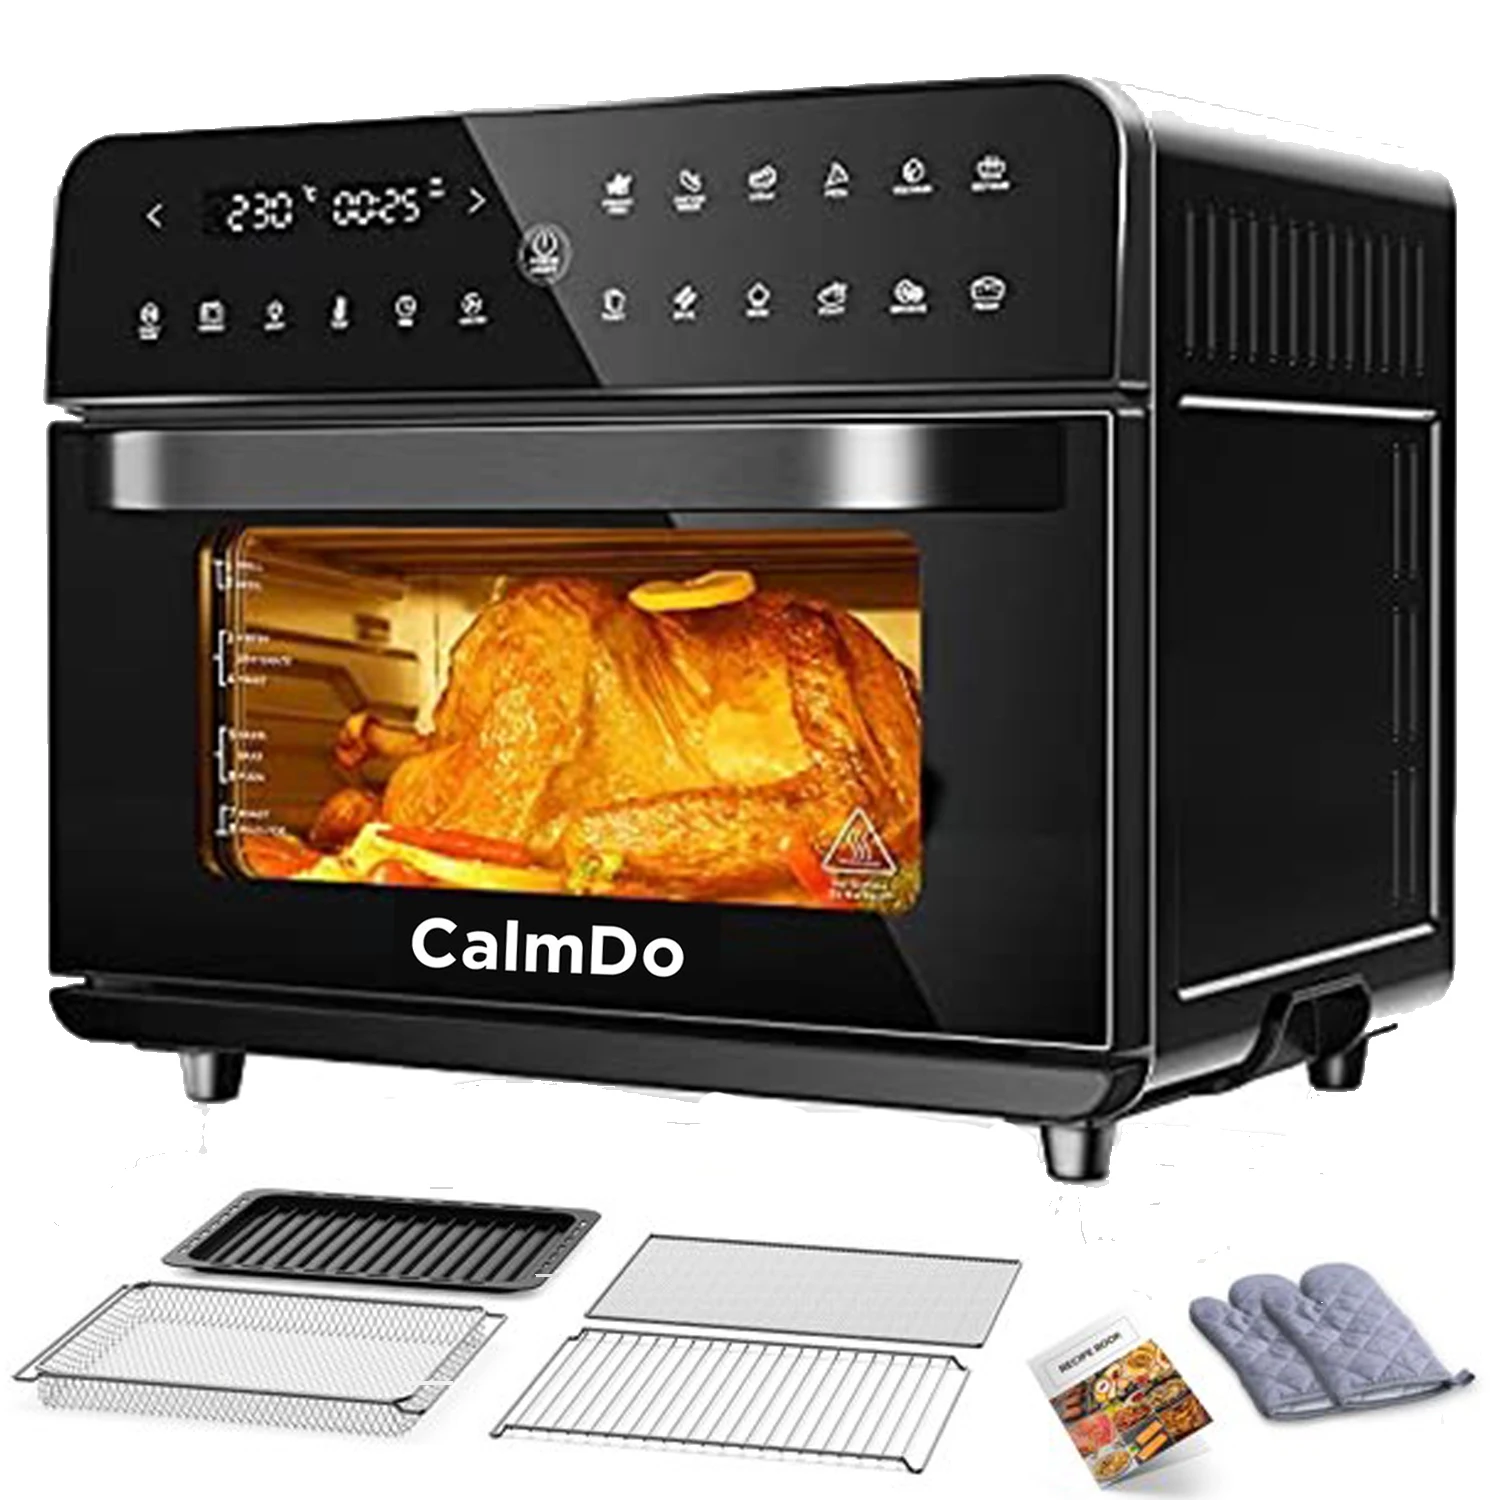 

CalmDo 25L 1800W Smart Air Fryer Oven Toaster Rotisserie and Dehydrator With LED Digital Touch Screen Convection Air Fryer Oven